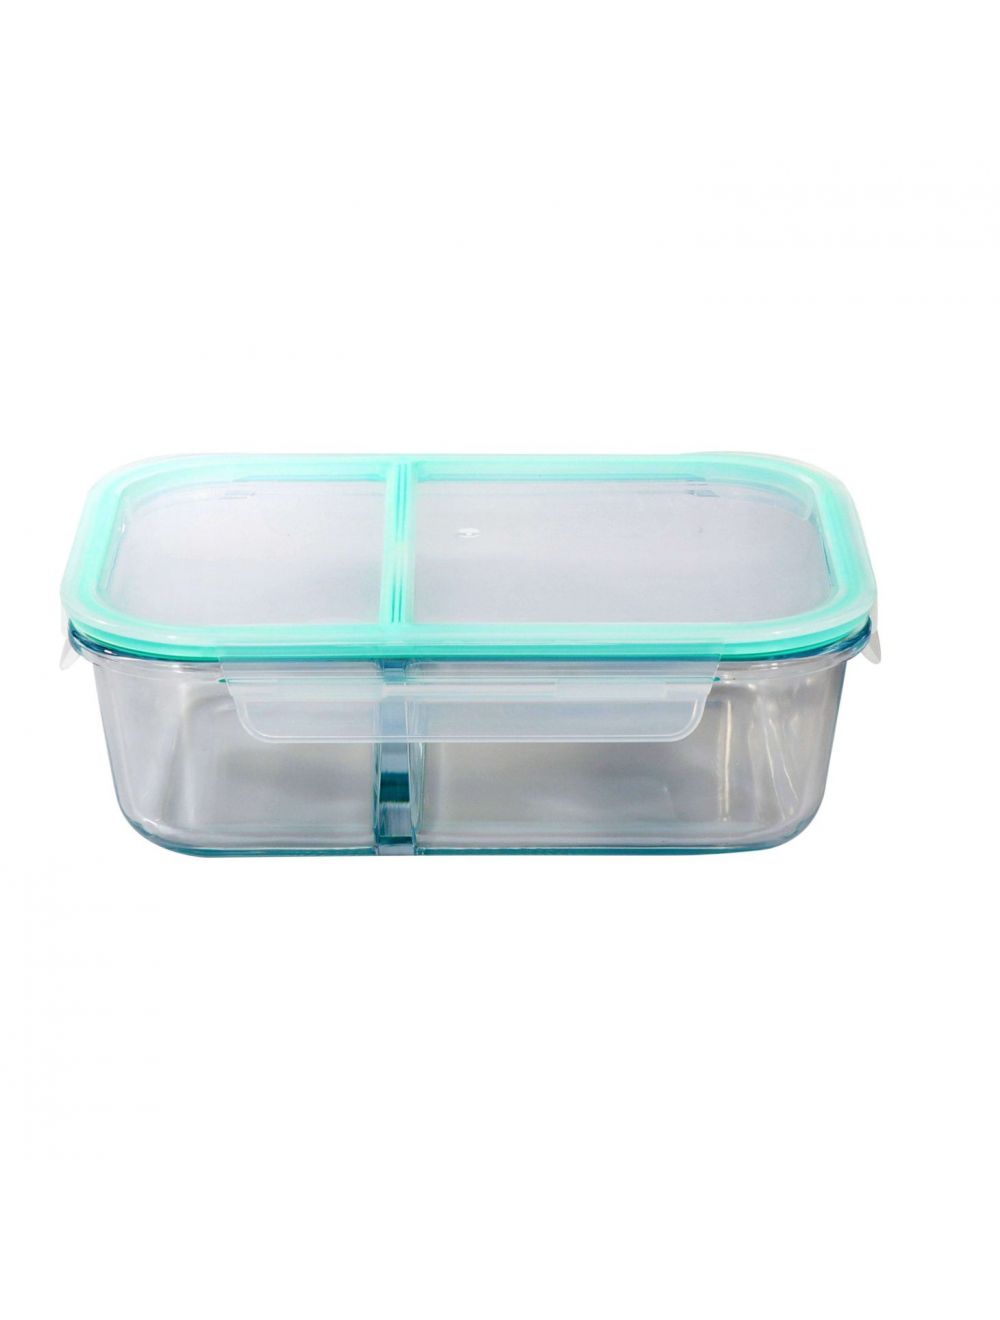 Royalford RF8817 1500 ml Glass Meal Prep Container